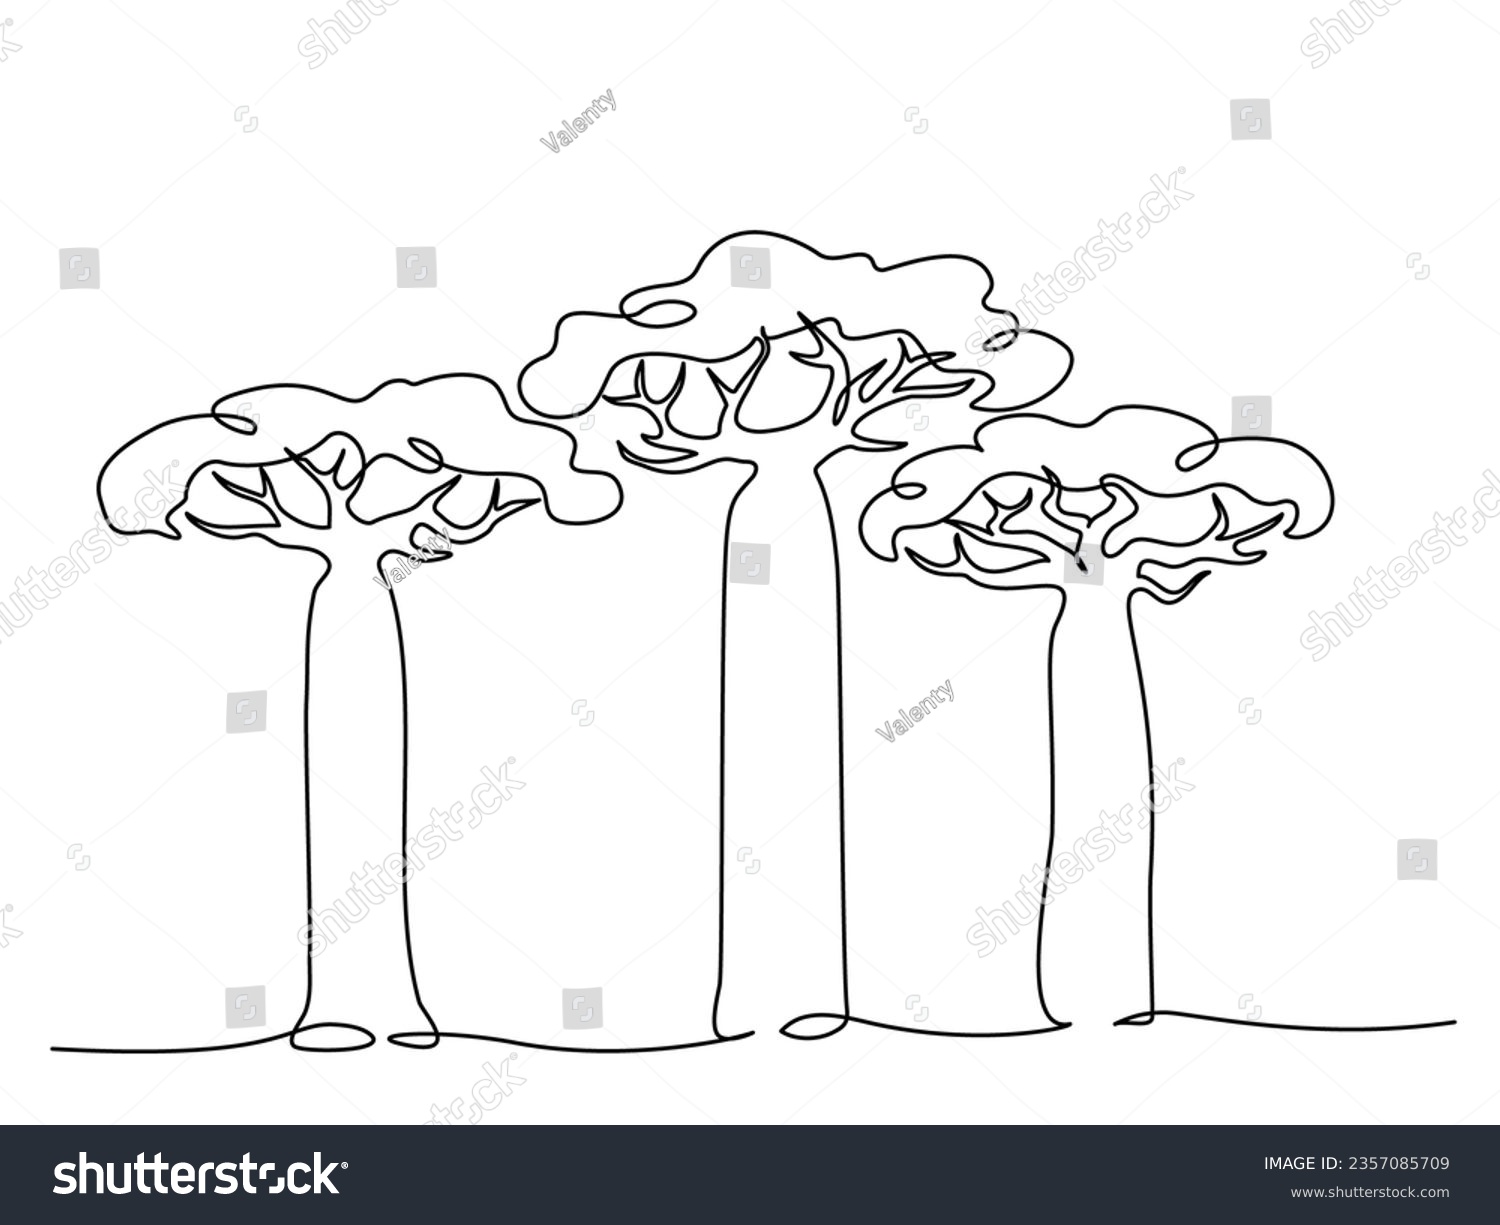 SVG of Three Exotic Baobab trees sign. Continuous one line art drawing style. Minimalist black linear sketch isolated on white background. Vector illustration svg